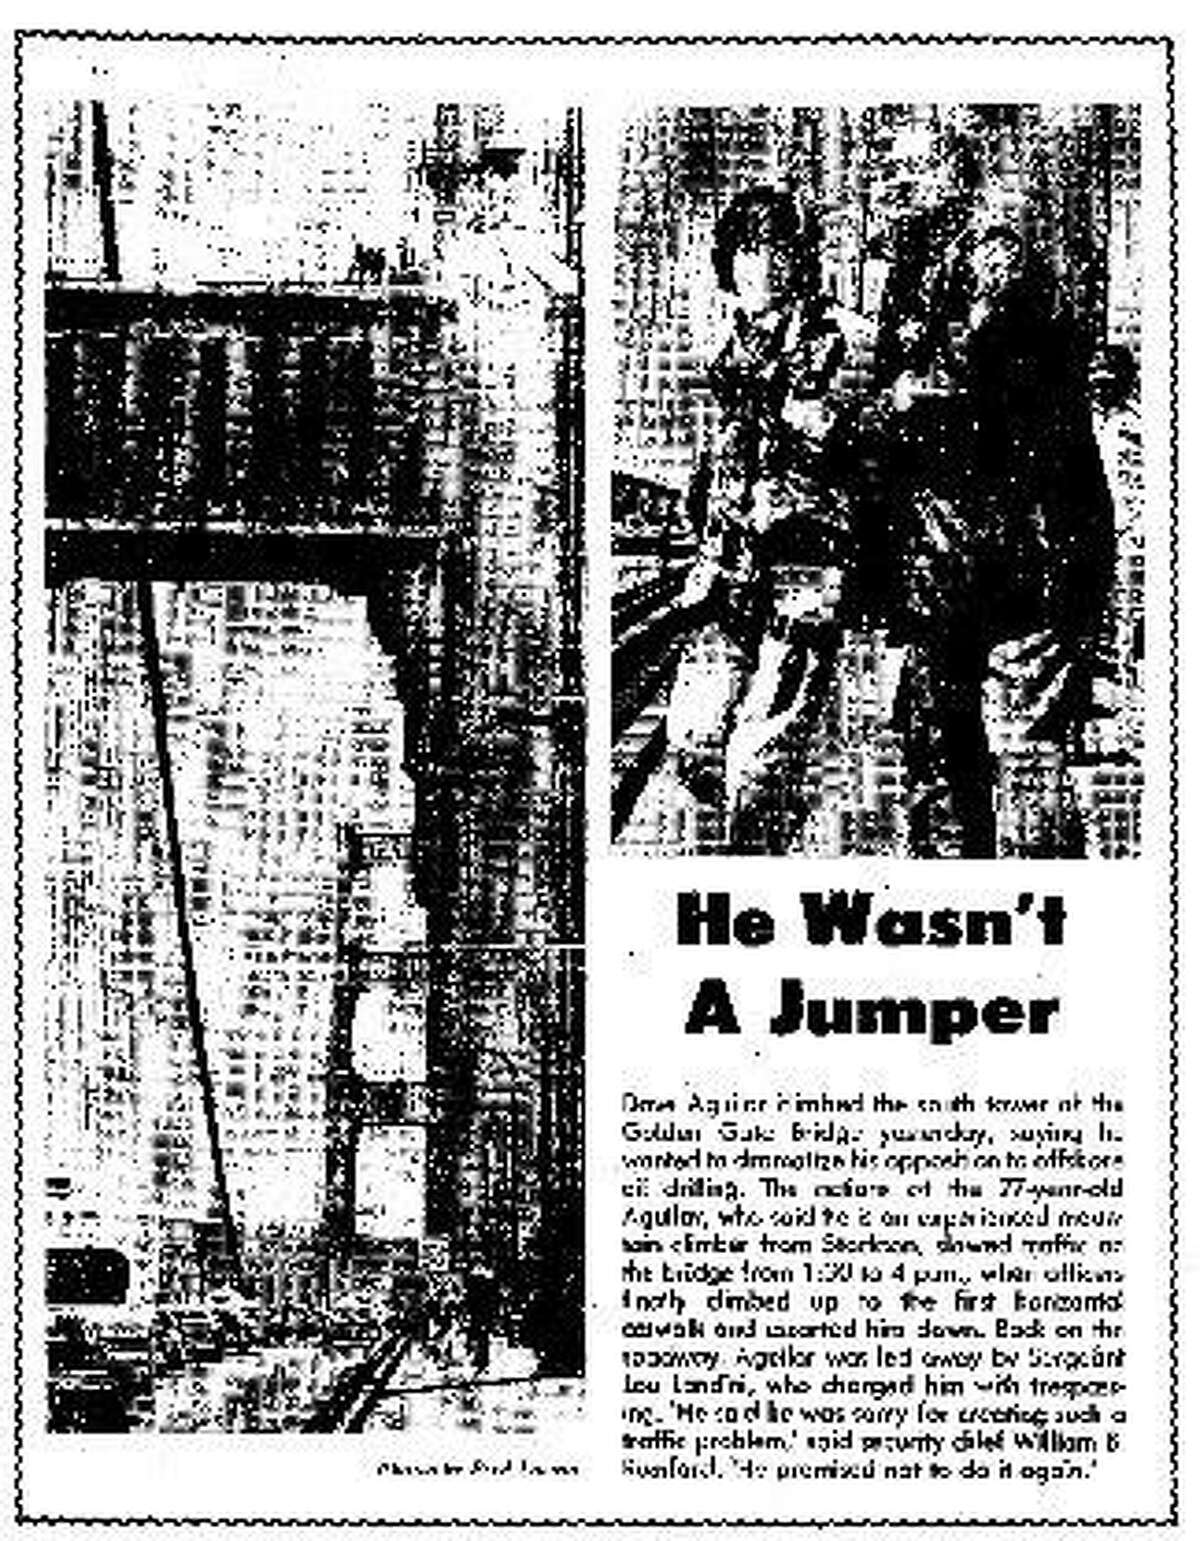 Dave Aguilar .. climbs the Golden Gate Bridge tower to express his opposition to offshore oil drilling, 05/02/1981 stunt s